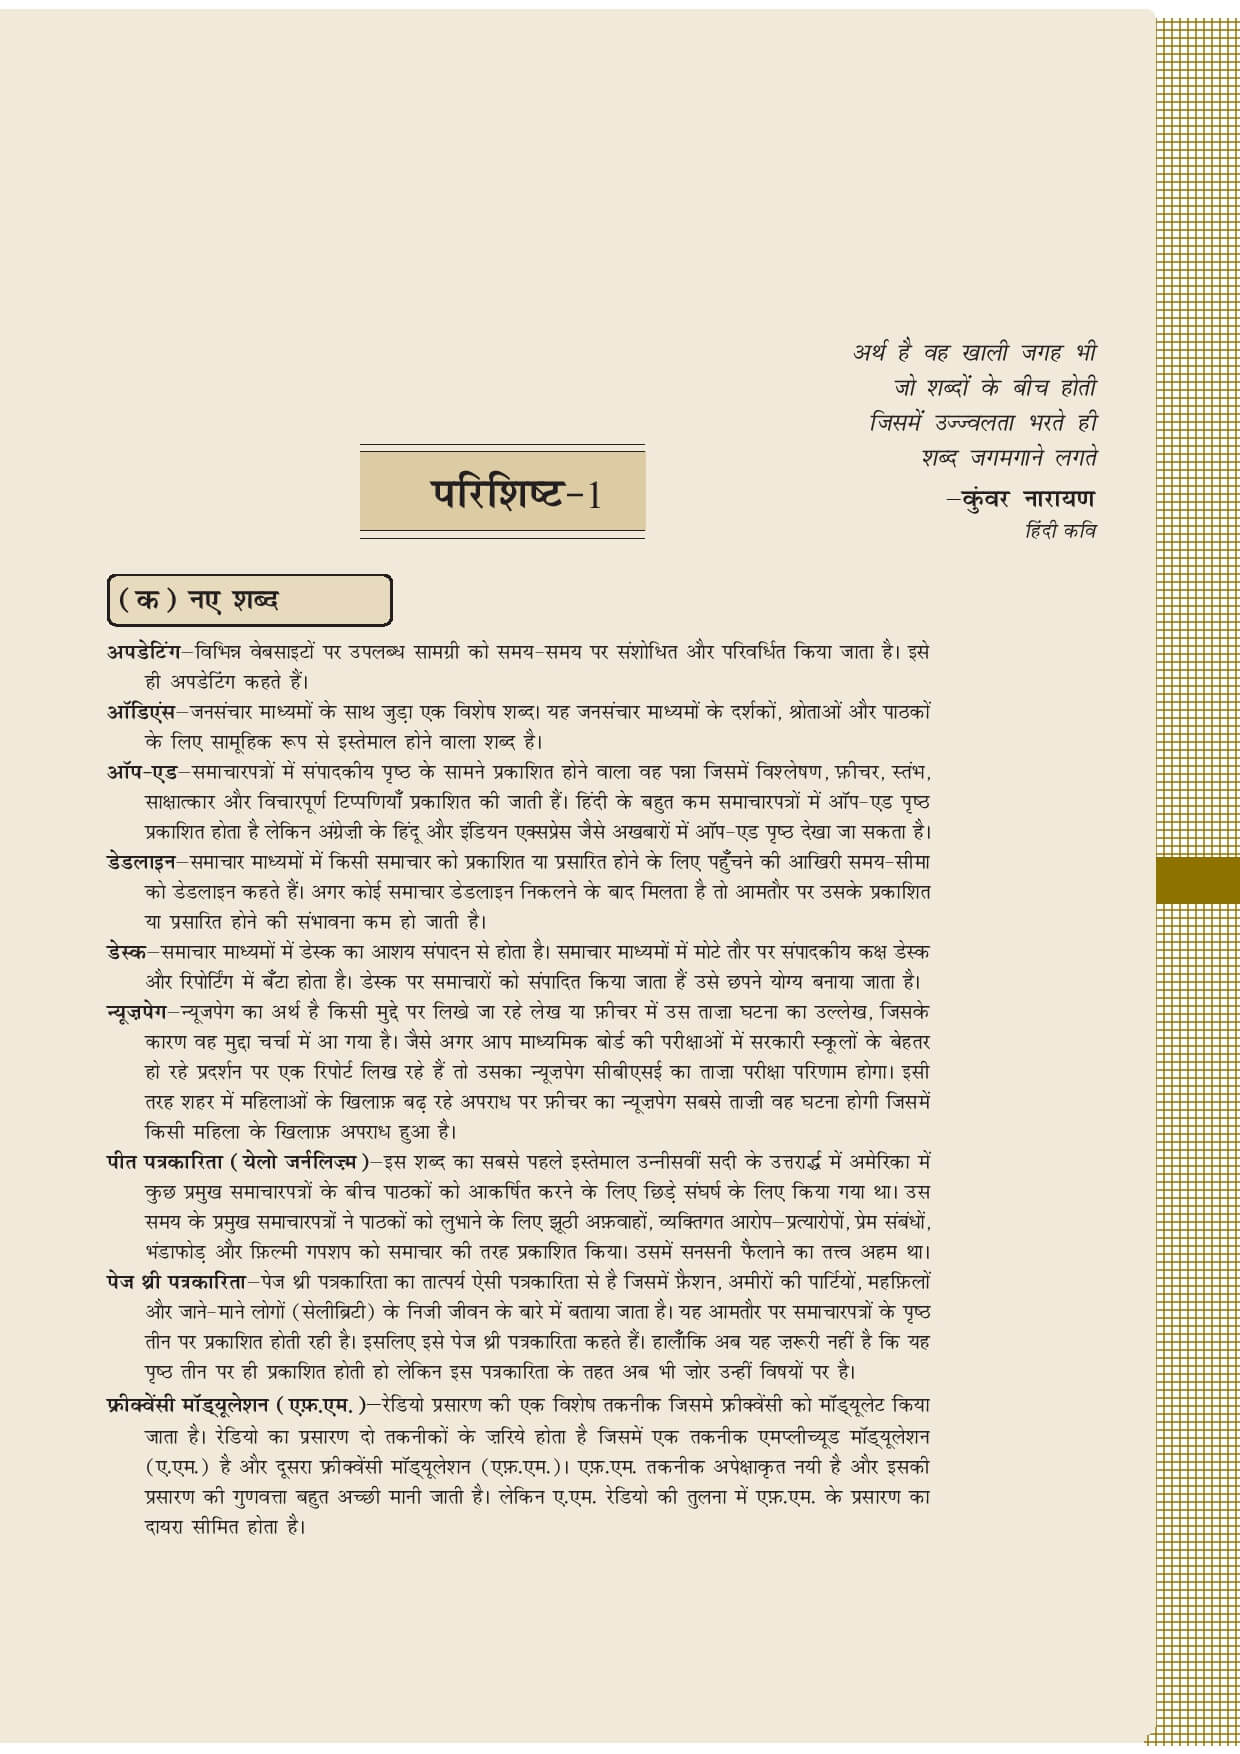 abhivyakti aur madhyam class 12 questions and answers